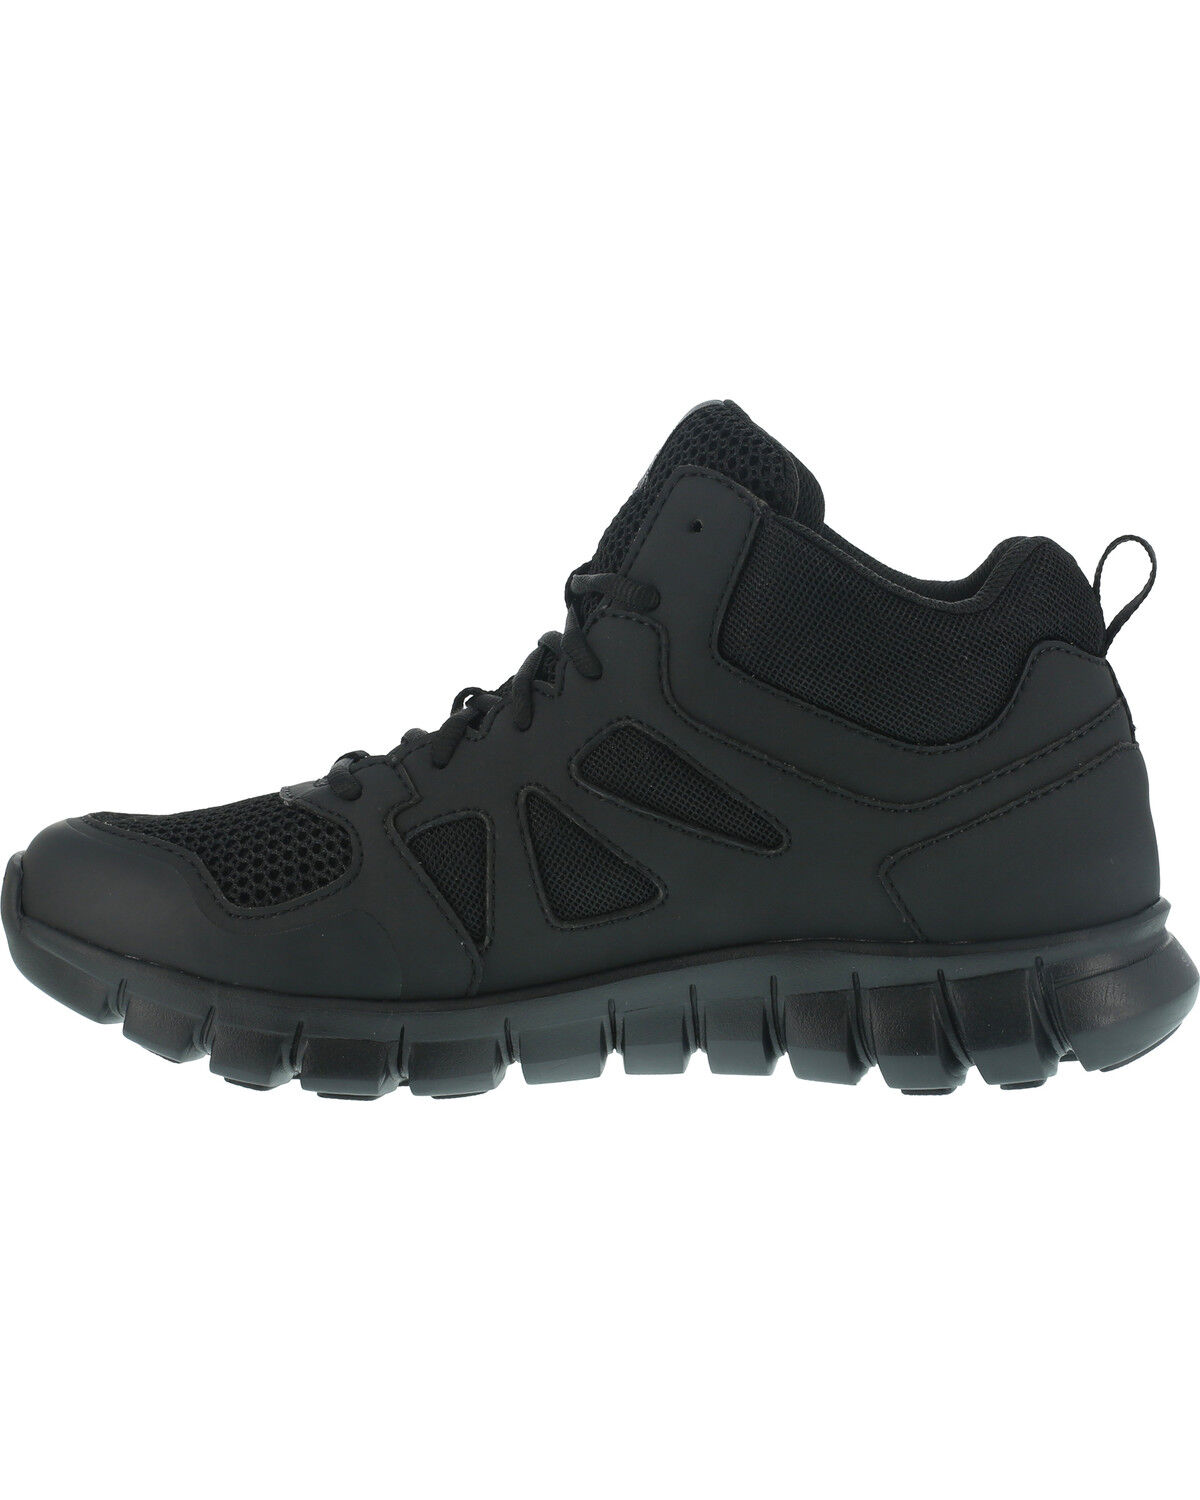 Sublite Cushion Tactical Mid Shoes 